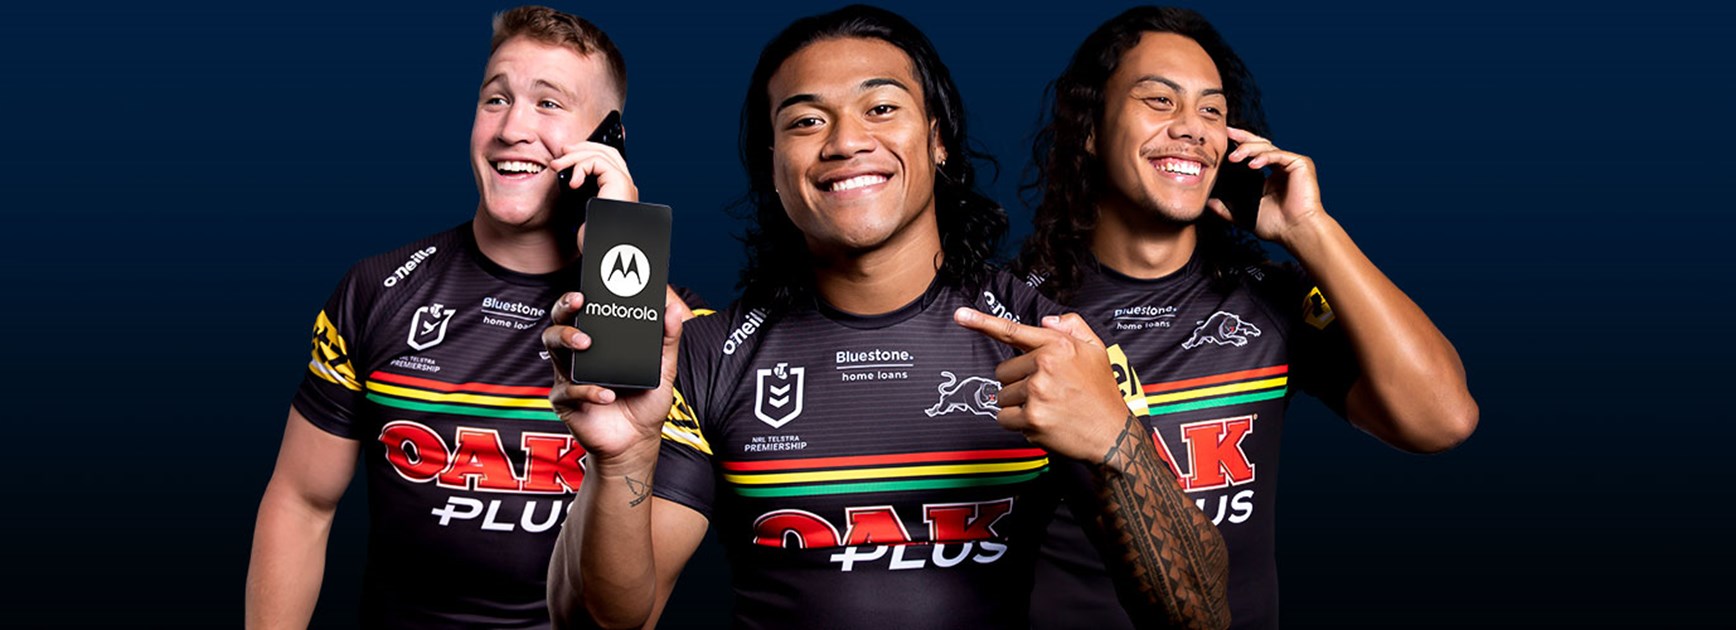 Panthers partners with Motorola